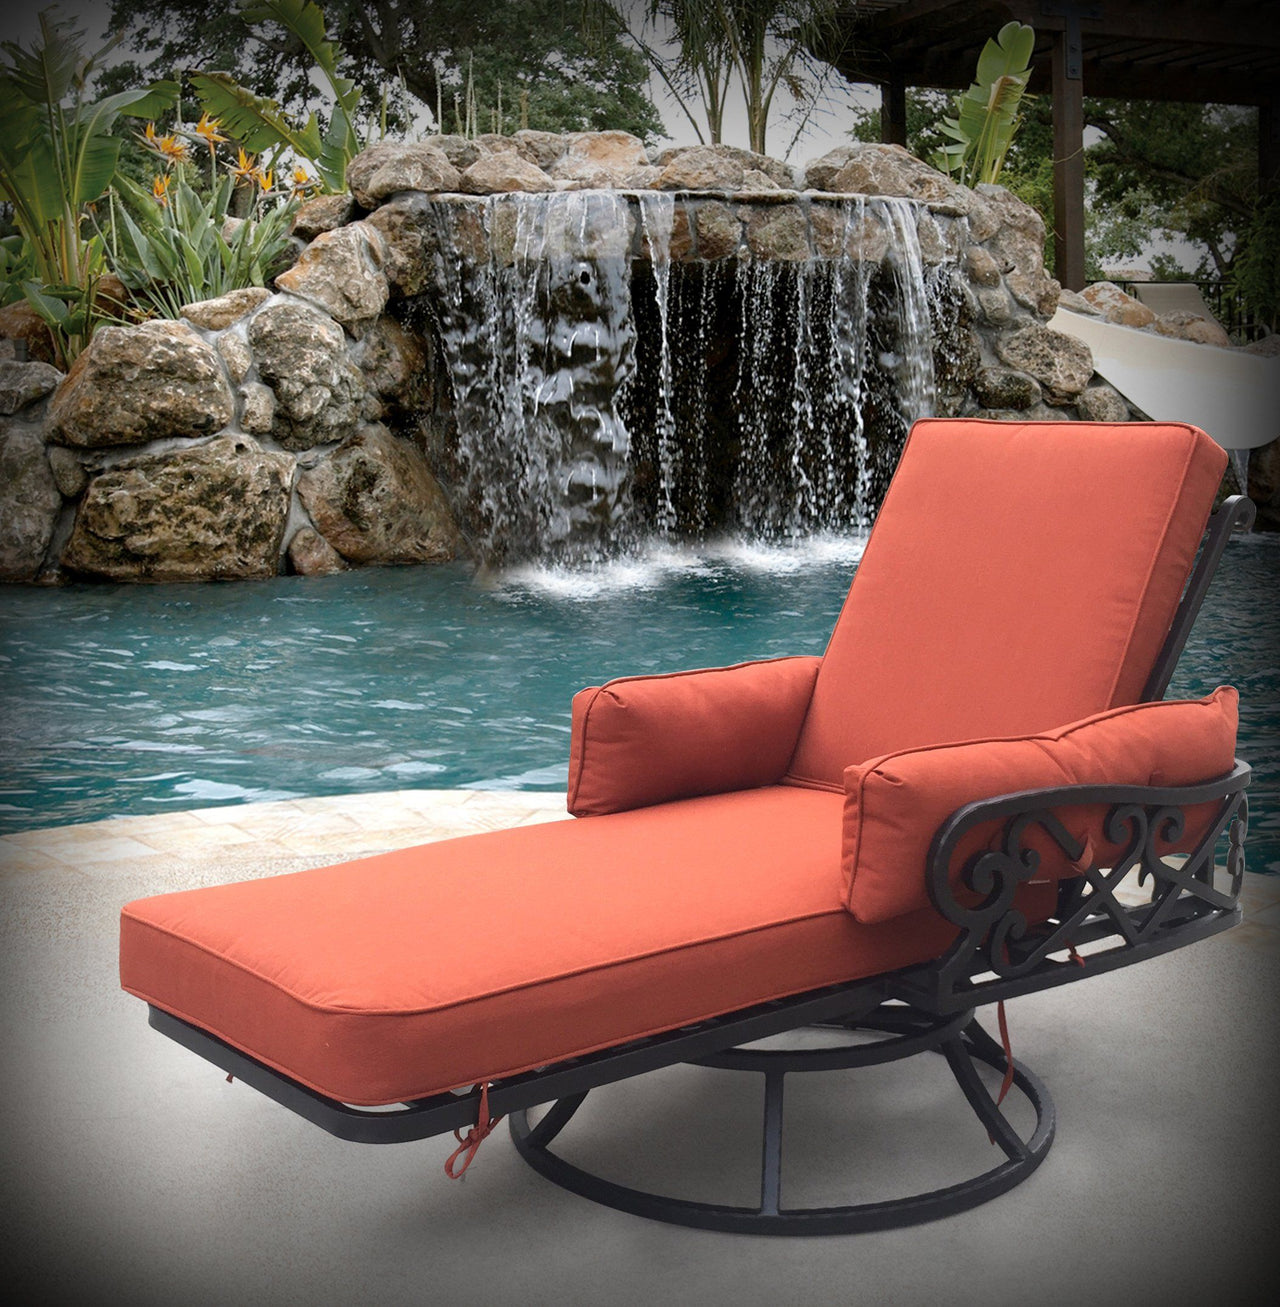 Chillounger Swivel Lounge with Cushions Outdoor Furniture Tuscan 